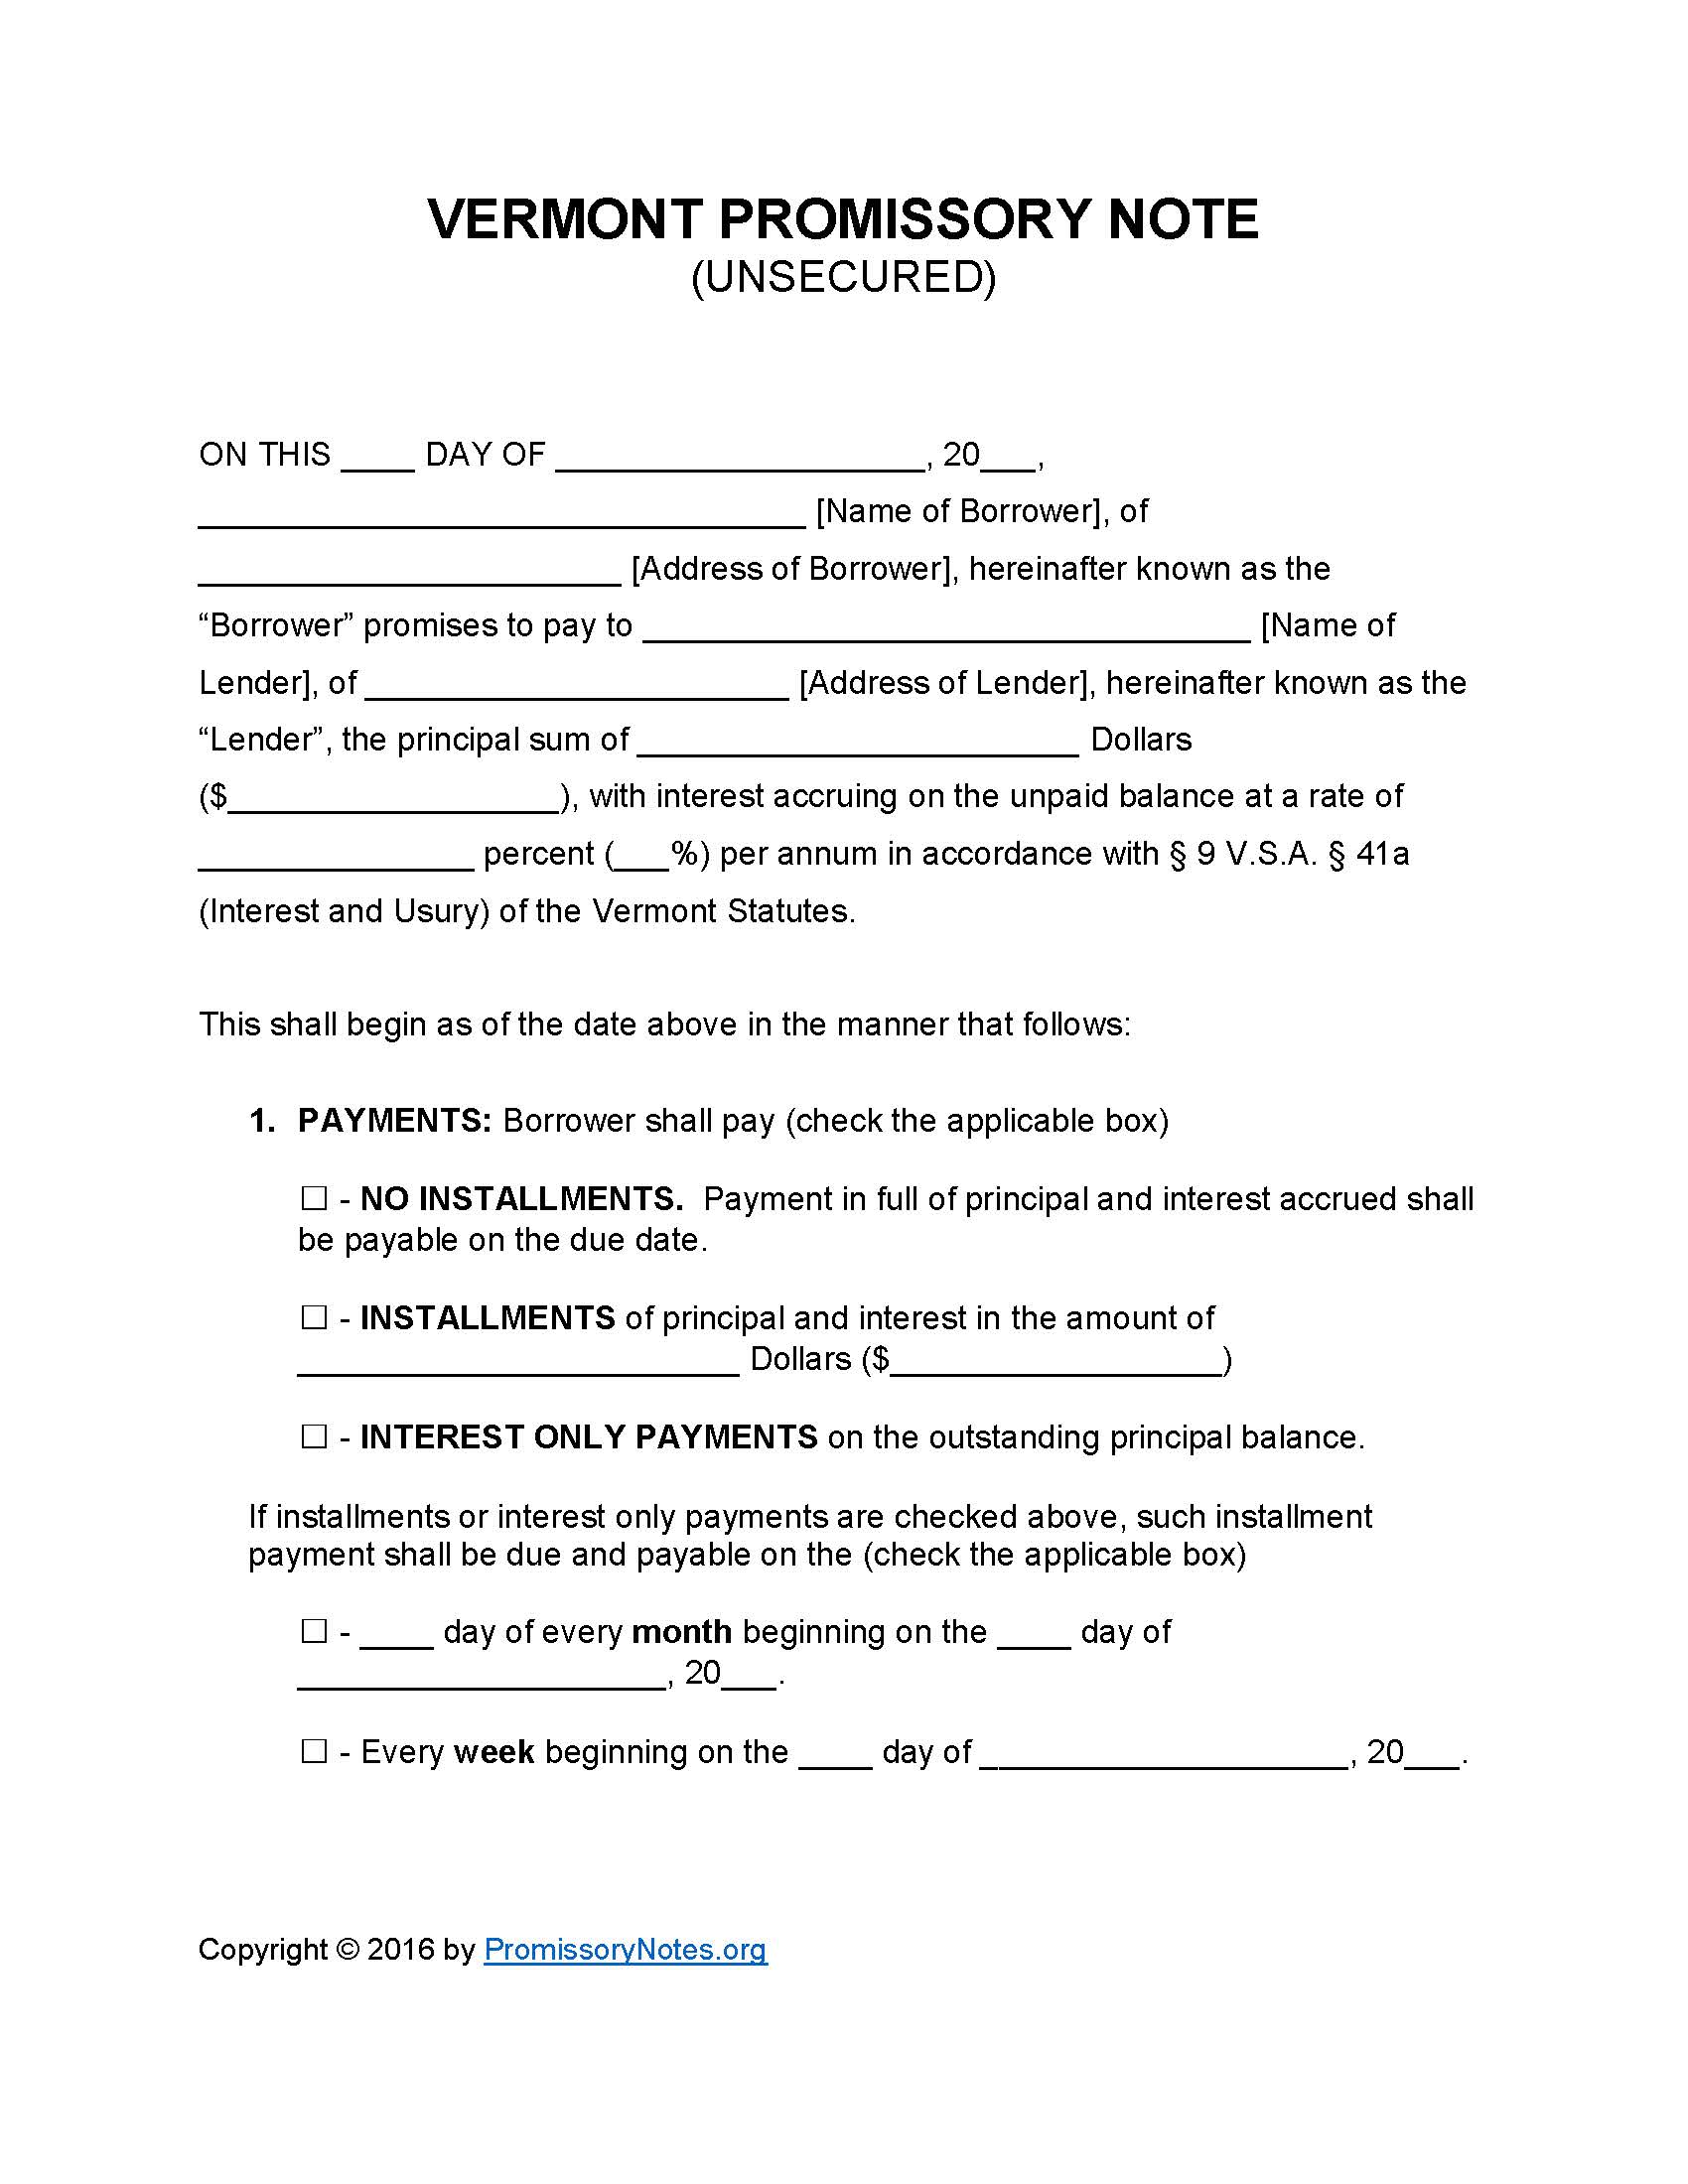 vermont-unsecured-promissory-note-form